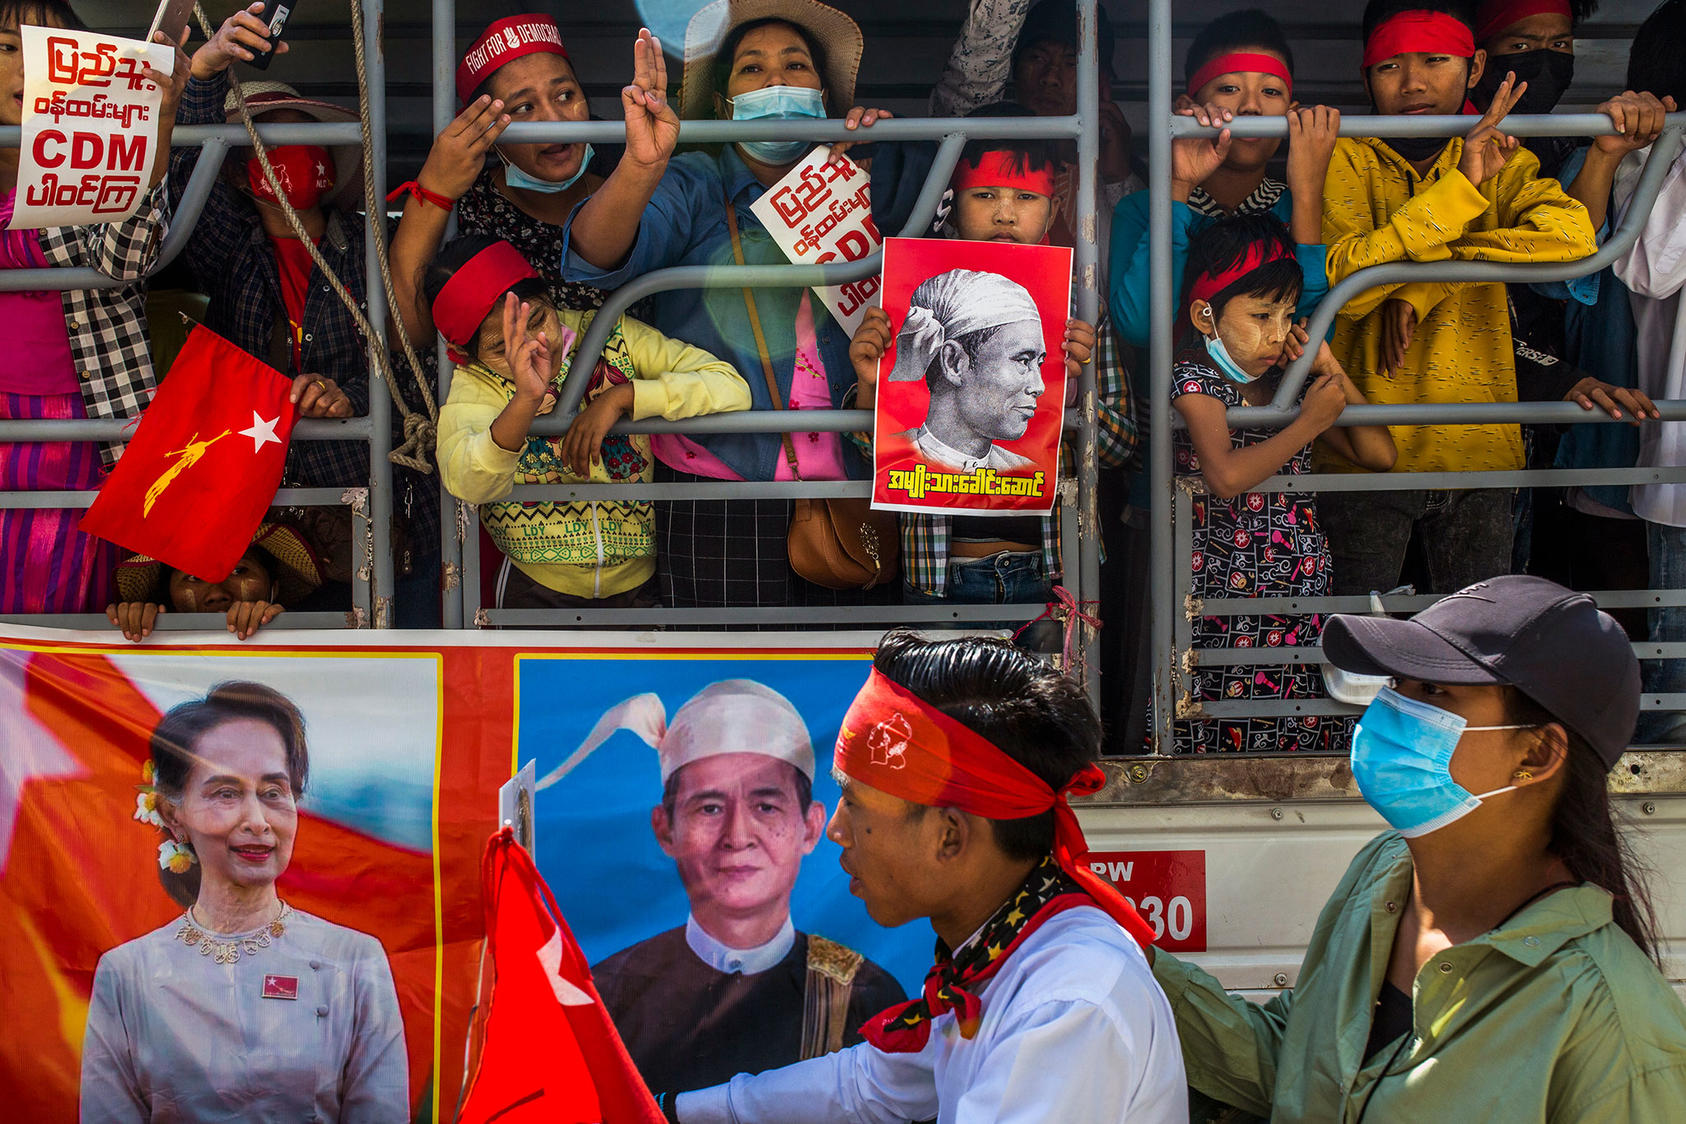 Protesters in Yangon, Myanmar with a poster of Daw Aung San Suu Kyi, the leader of the country’s ousted civilian government and head of the NLD, at lower left. Feb. 13, 2021. (The New York Times)